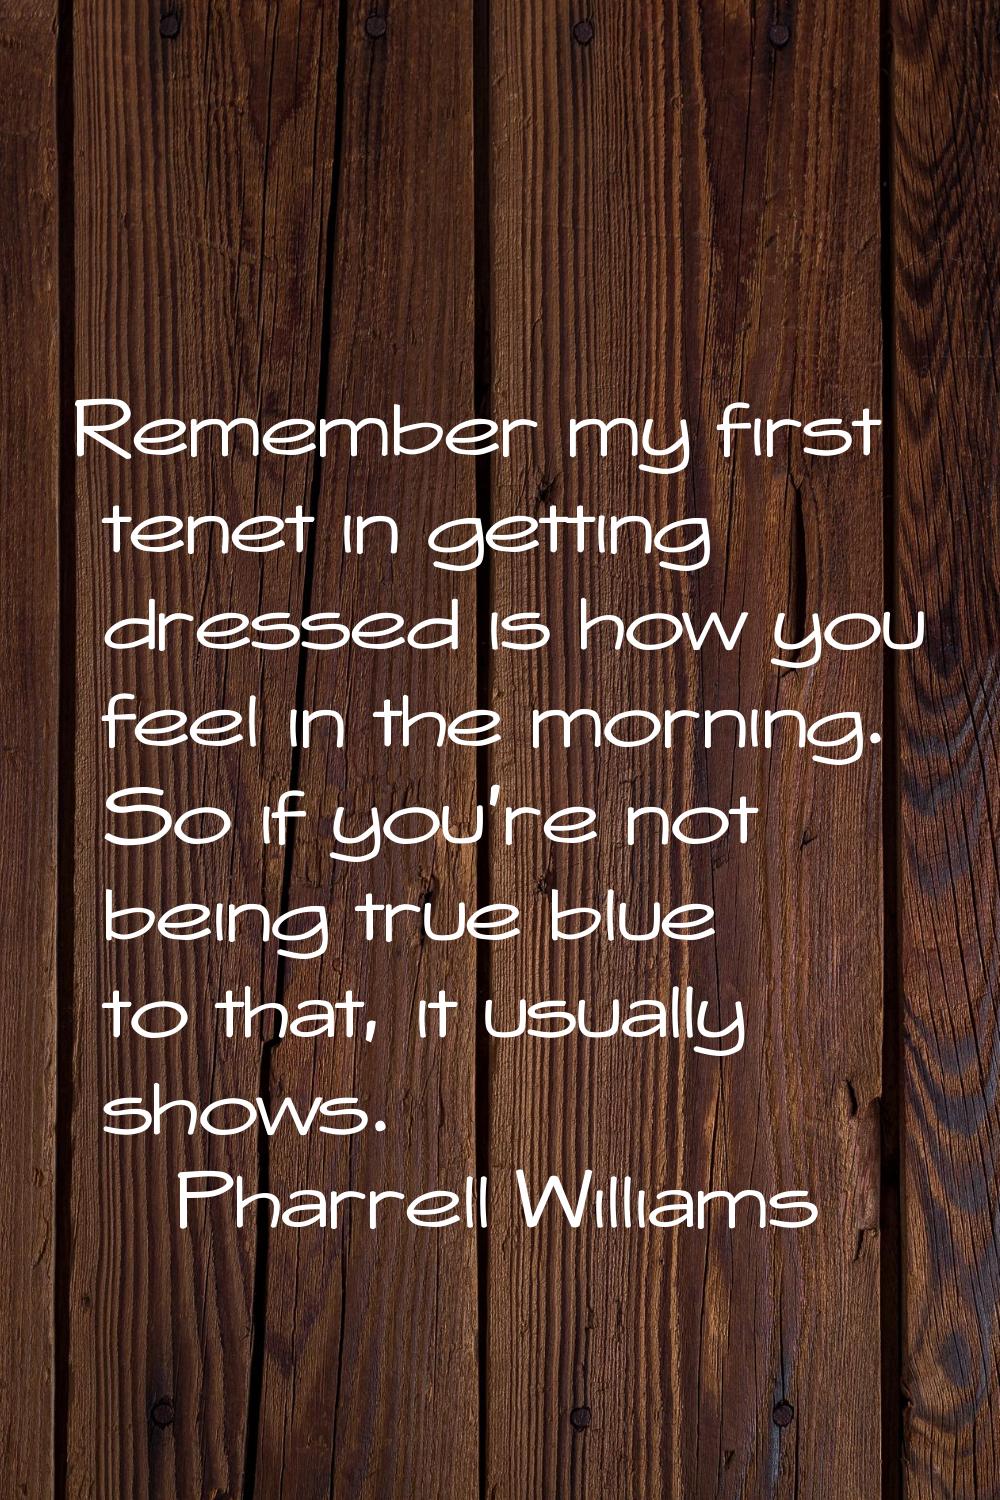 Remember my first tenet in getting dressed is how you feel in the morning. So if you're not being t